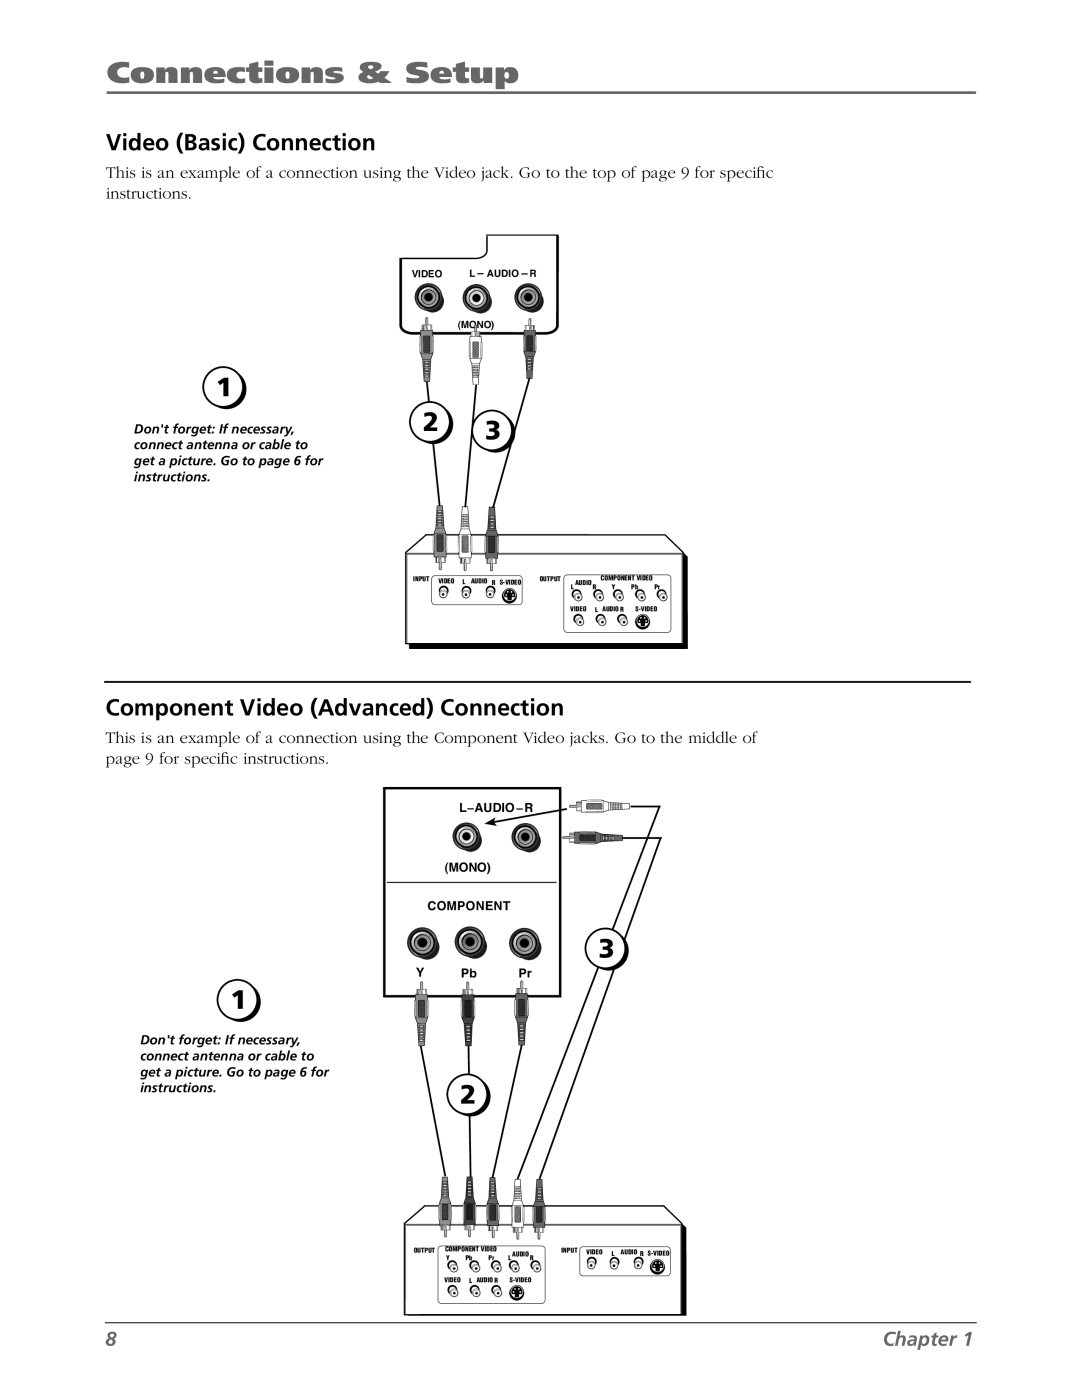 RCA L26WD26D warranty Video Basic Connection, Component Video Advanced Connection, Connections & Setup, Chapter 